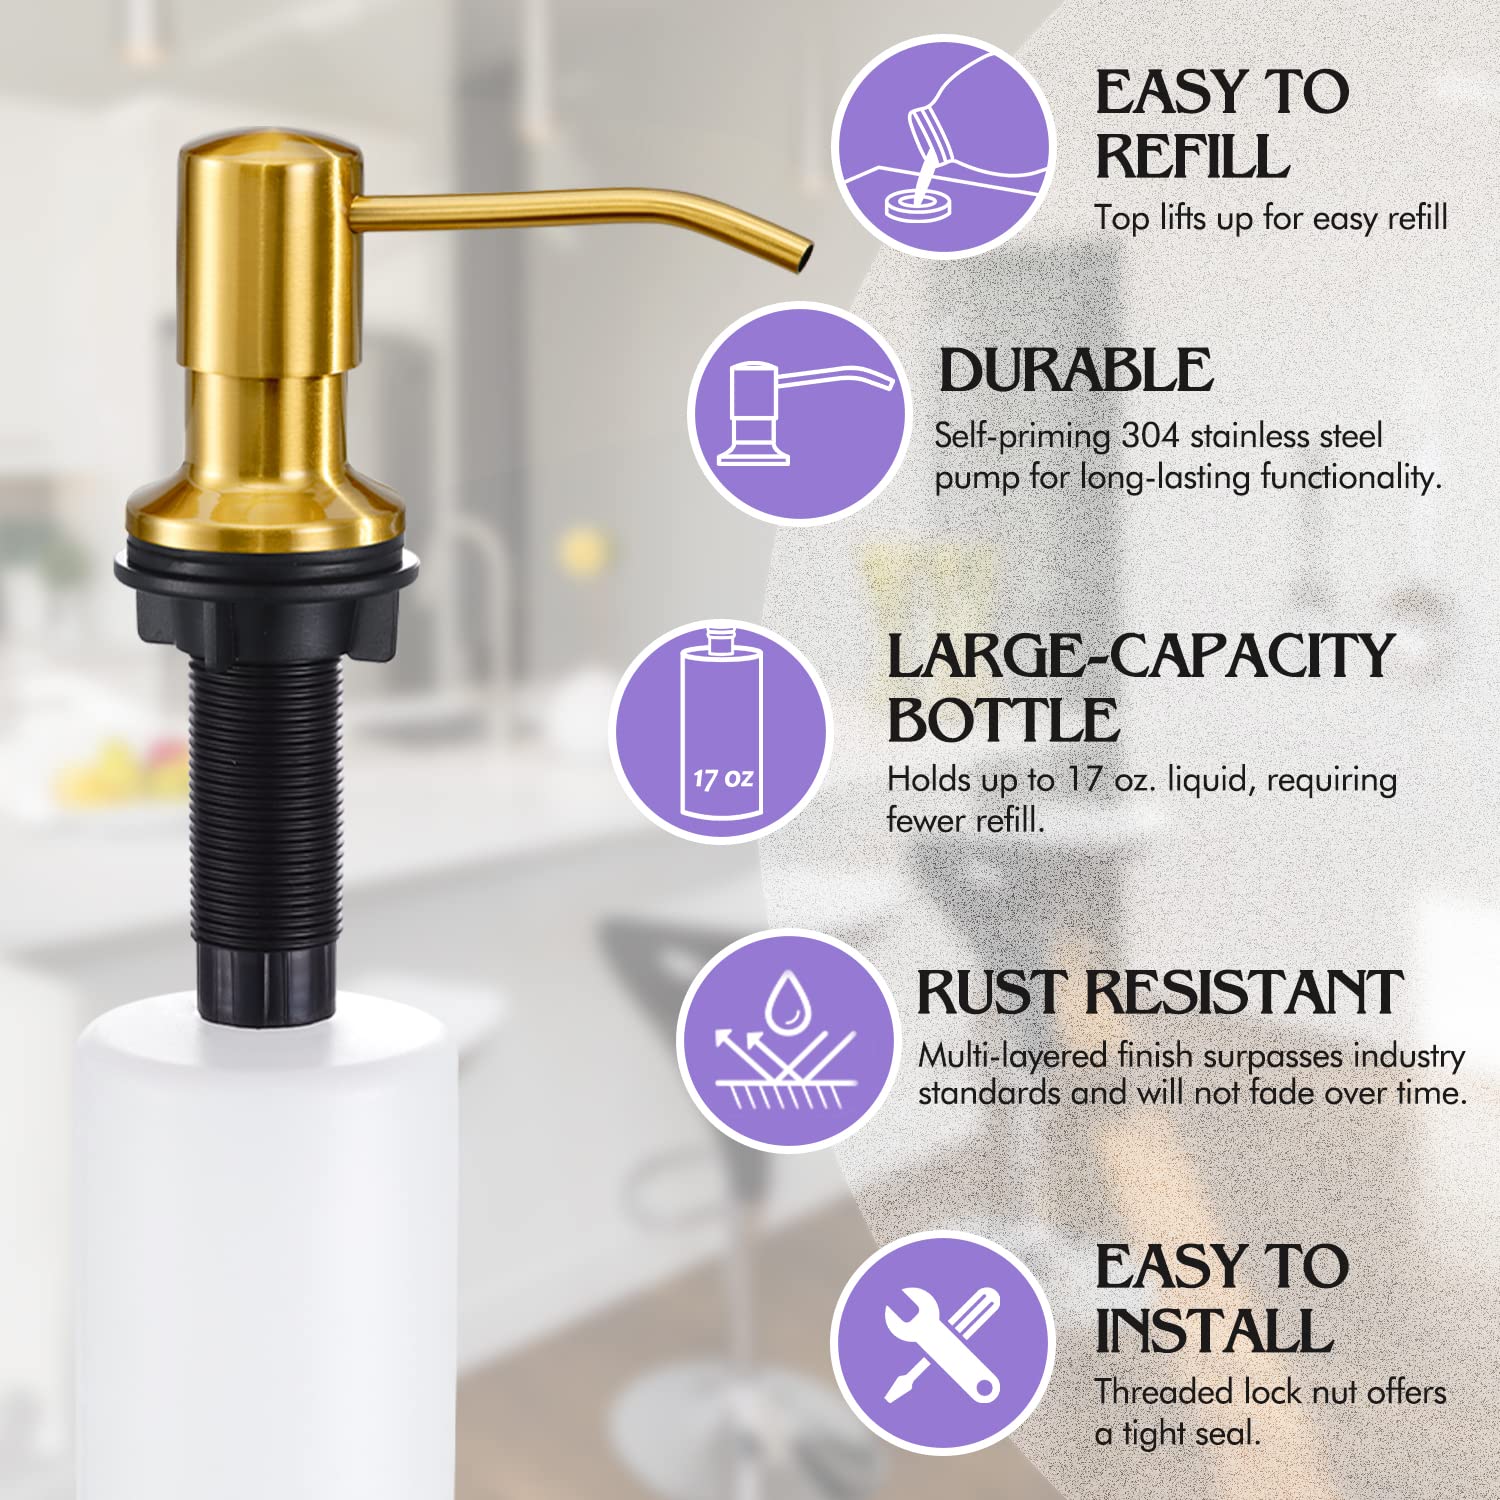 Hoanmpy Soap Dispenser for Kitchen Sink Brushed Gold, Built in Stainless Steel Kitchen Soap Dispenser, Refill from The Top,in Counter Kitchen Sink Soap Dispenser,17 oz